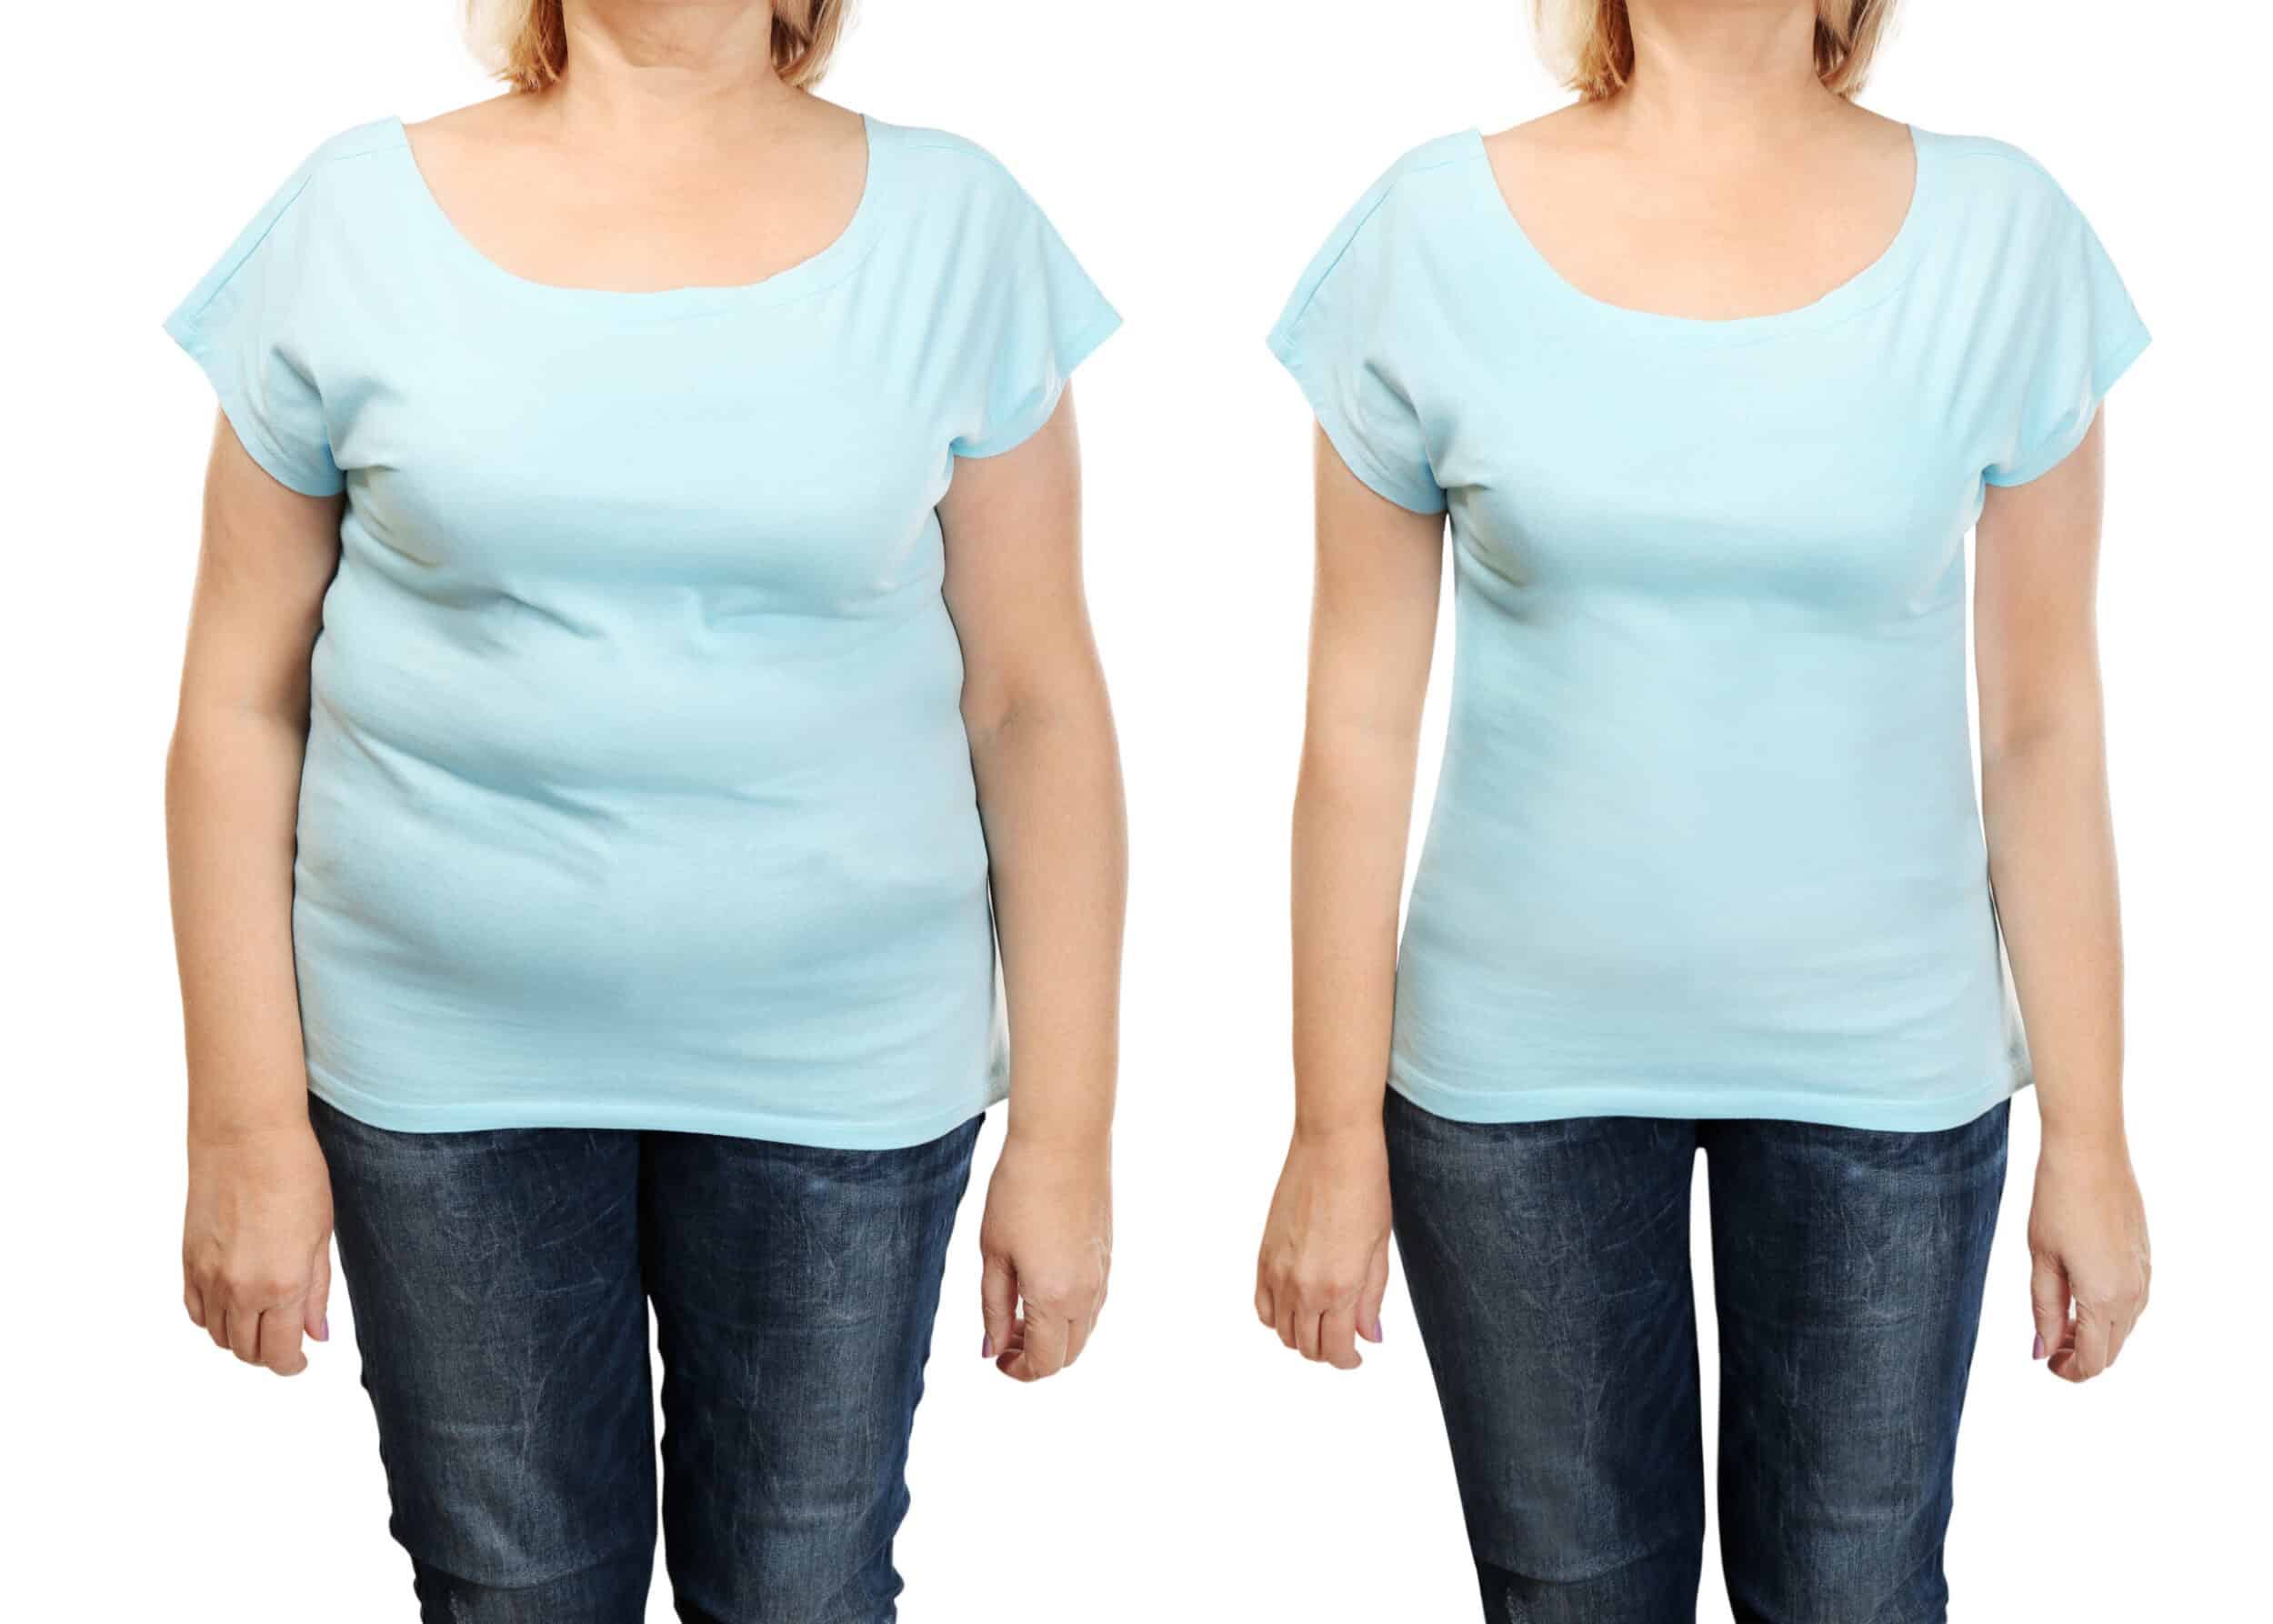 Mature,Woman's,Body,Before,And,After,Weightloss,On,White,Background.